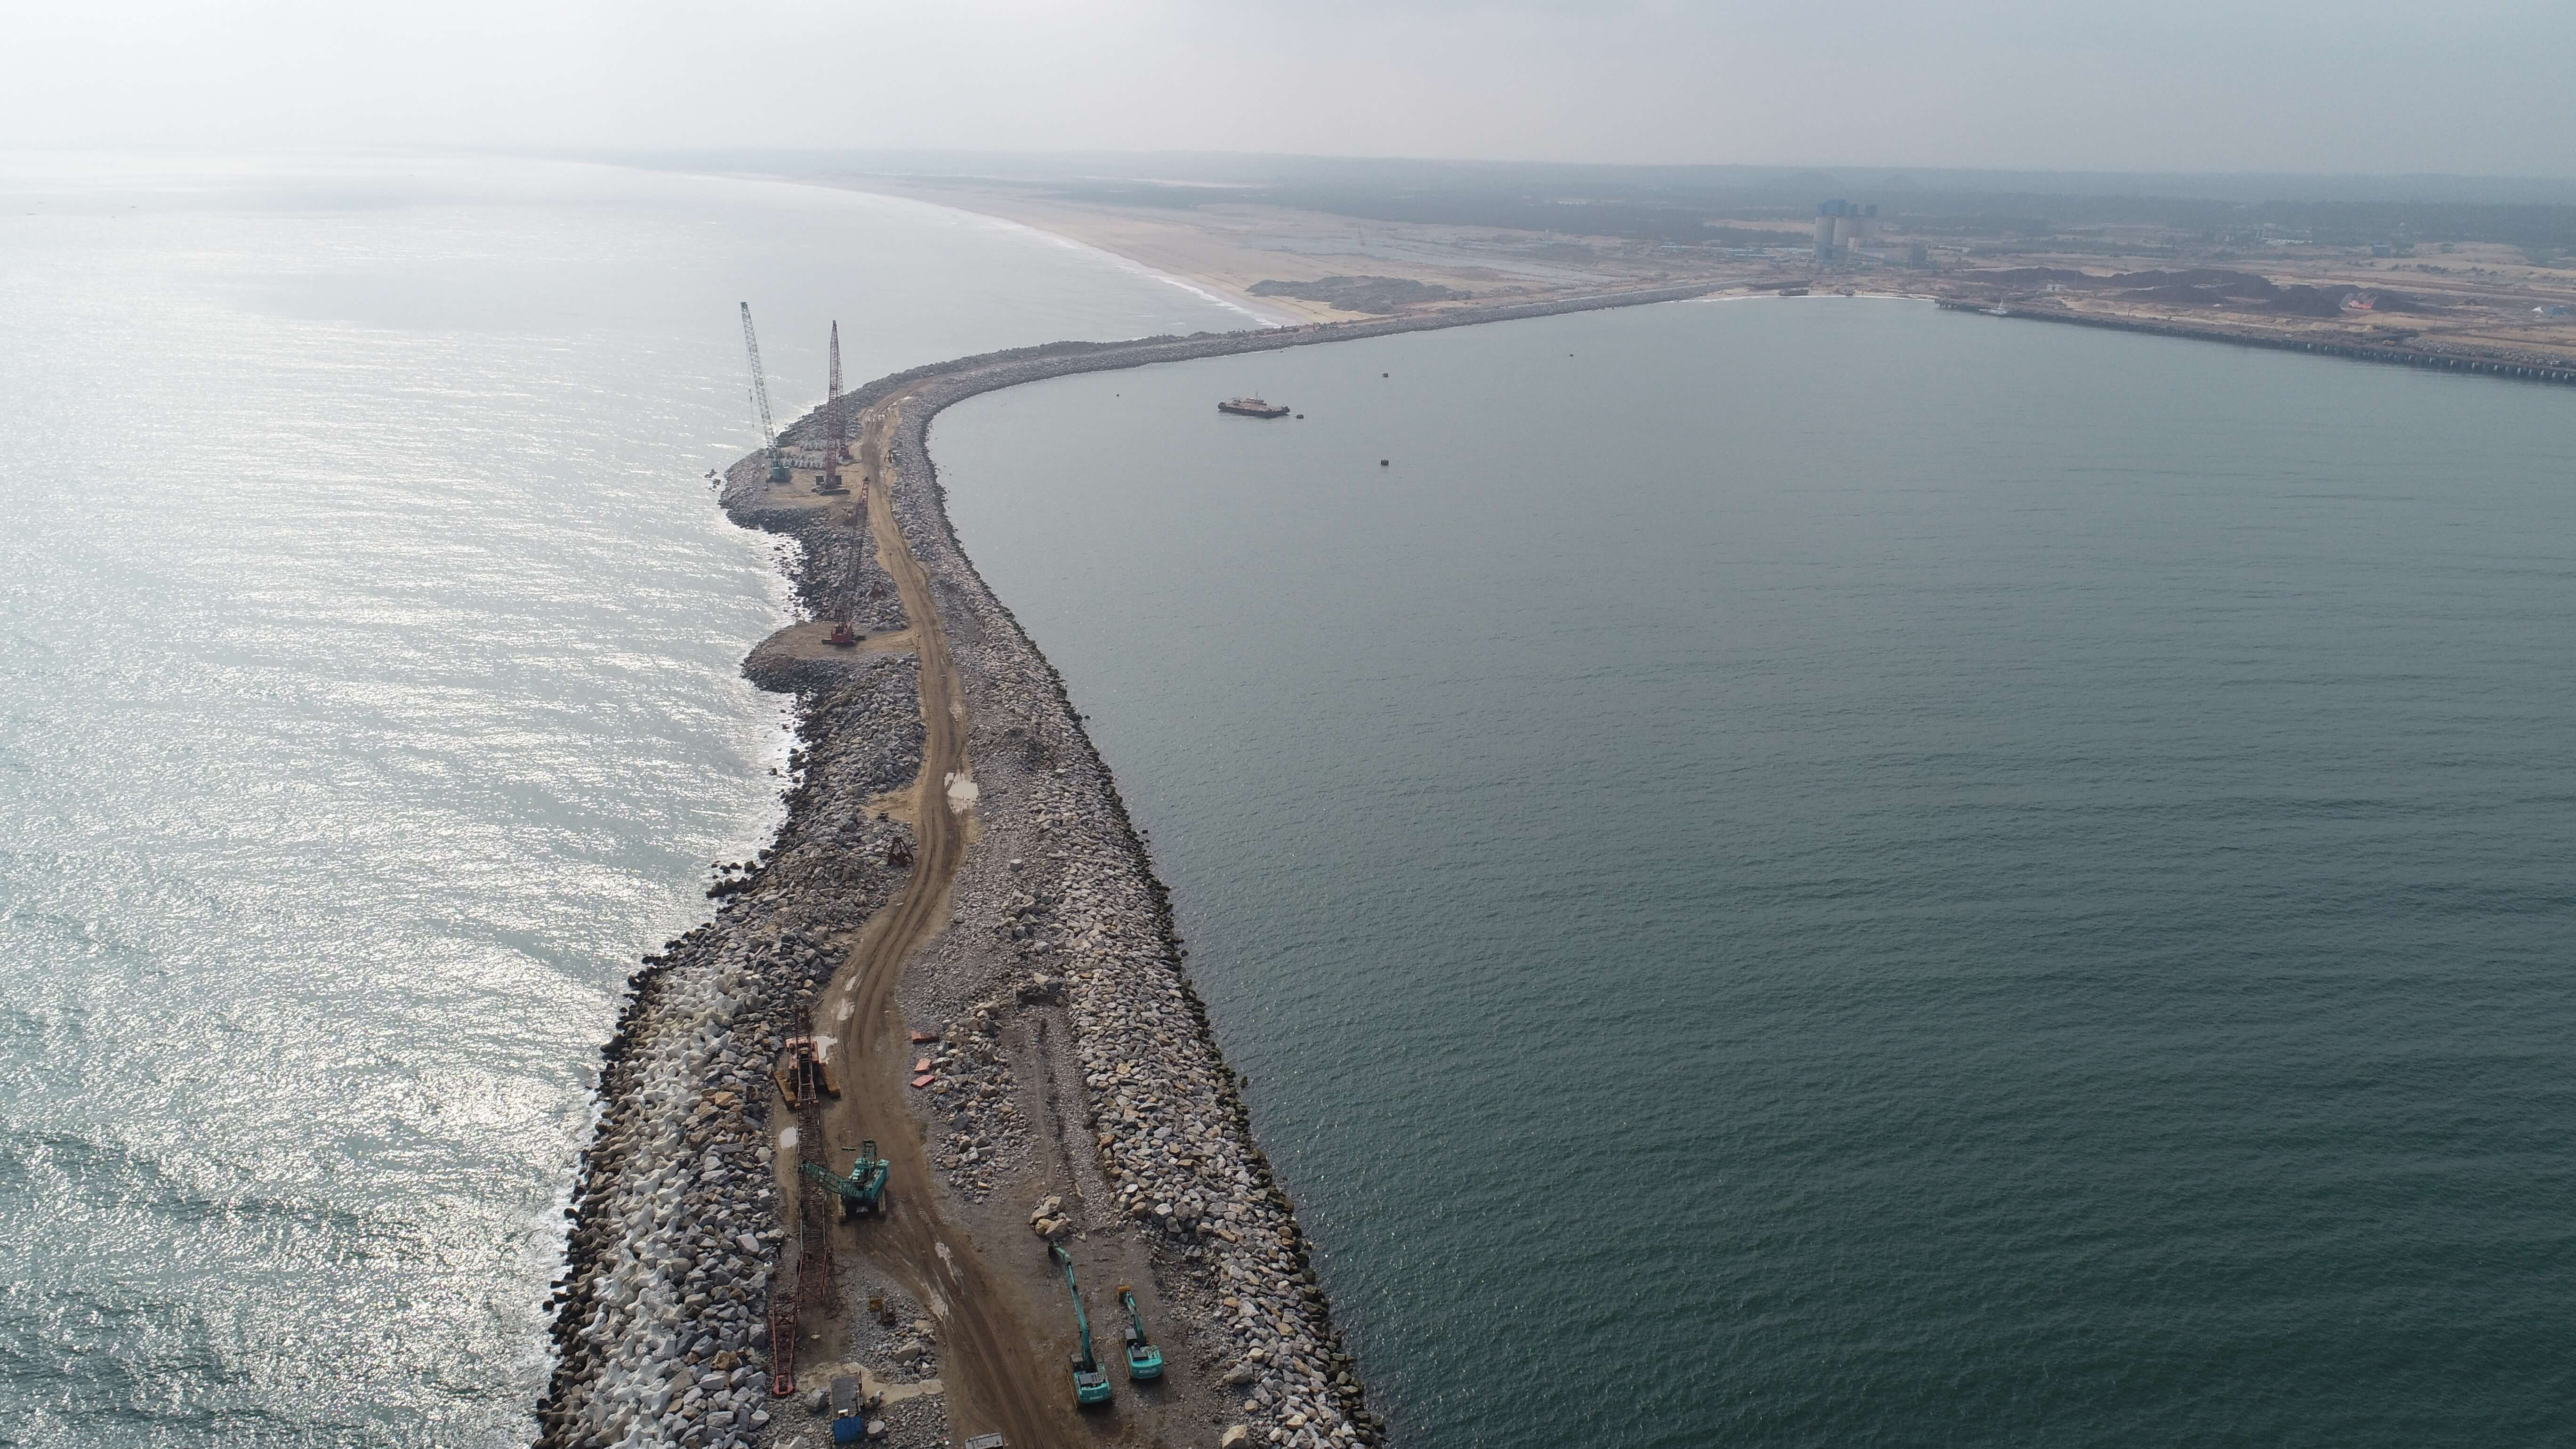 The south breakwater, which is being rebuilt and extended, was damaged twice by devastating cyclones during construction period